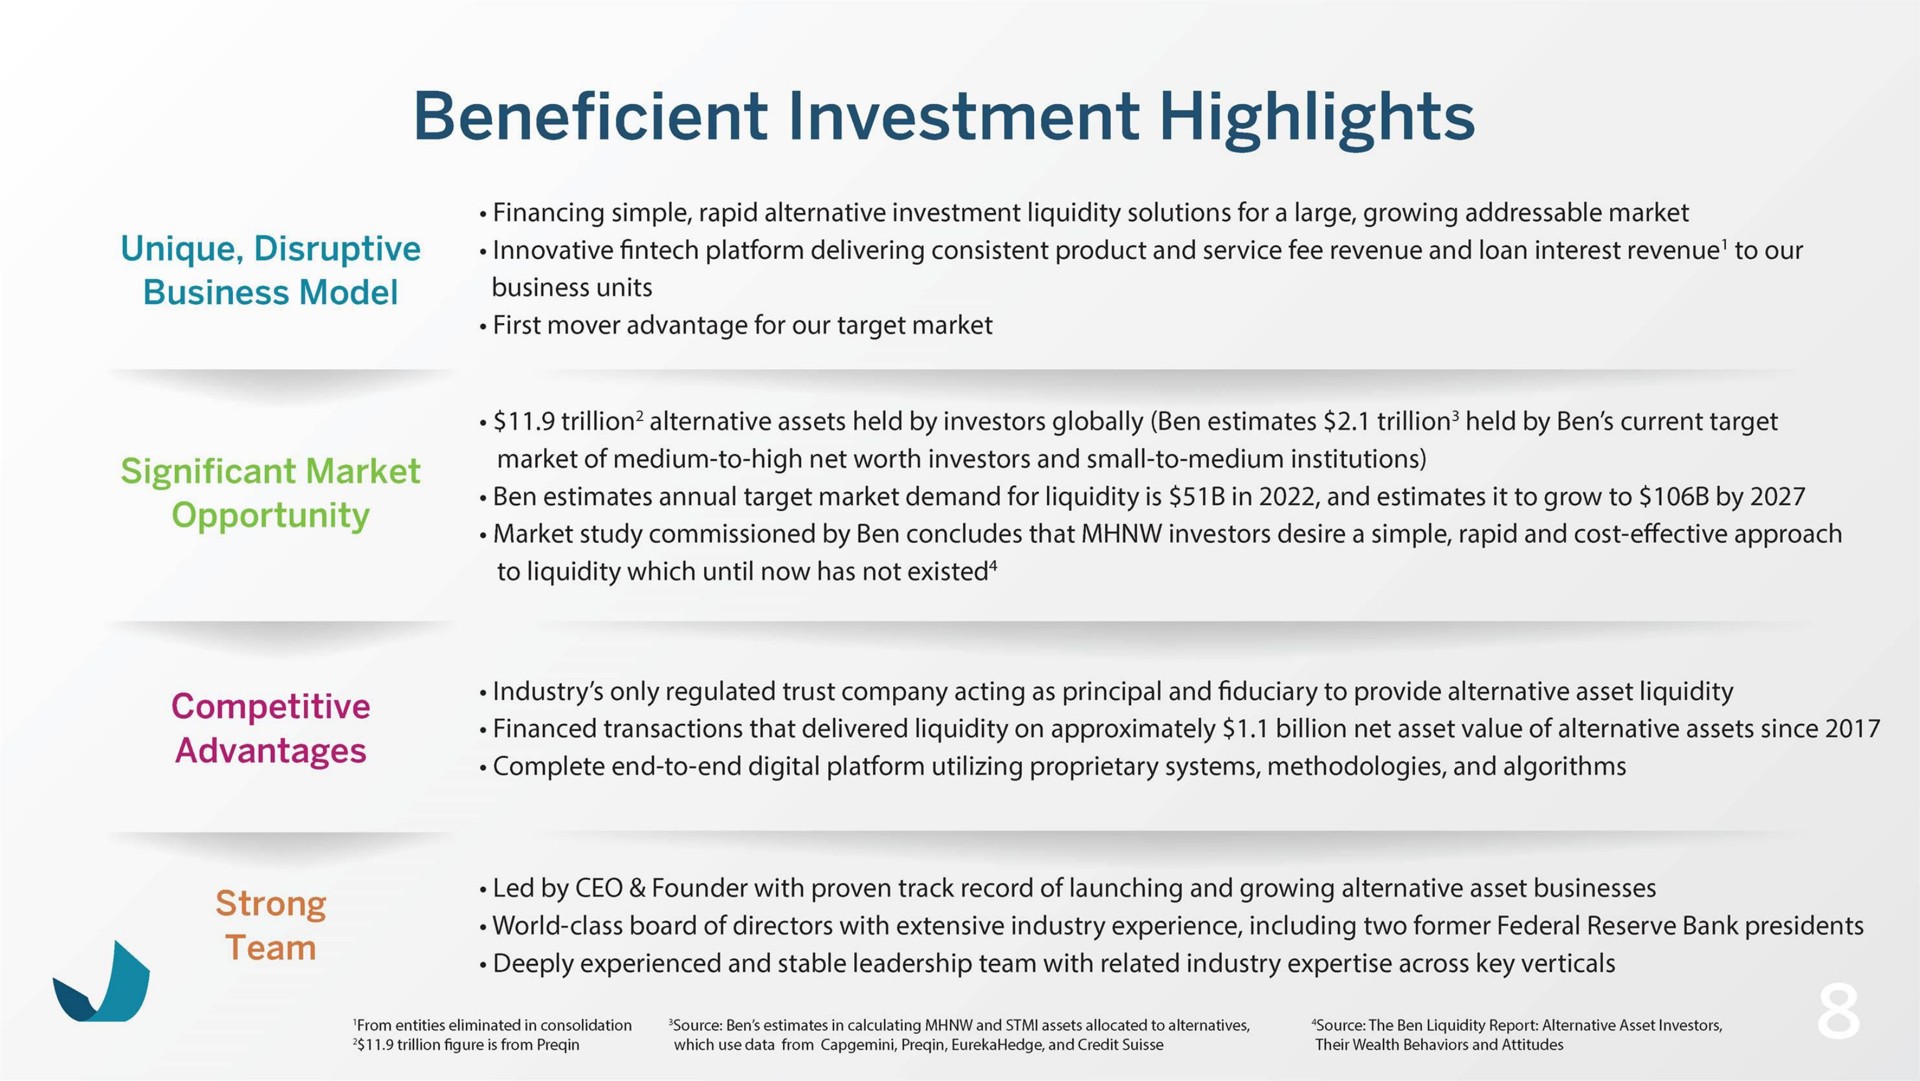 investment highlights competitive | Beneficient